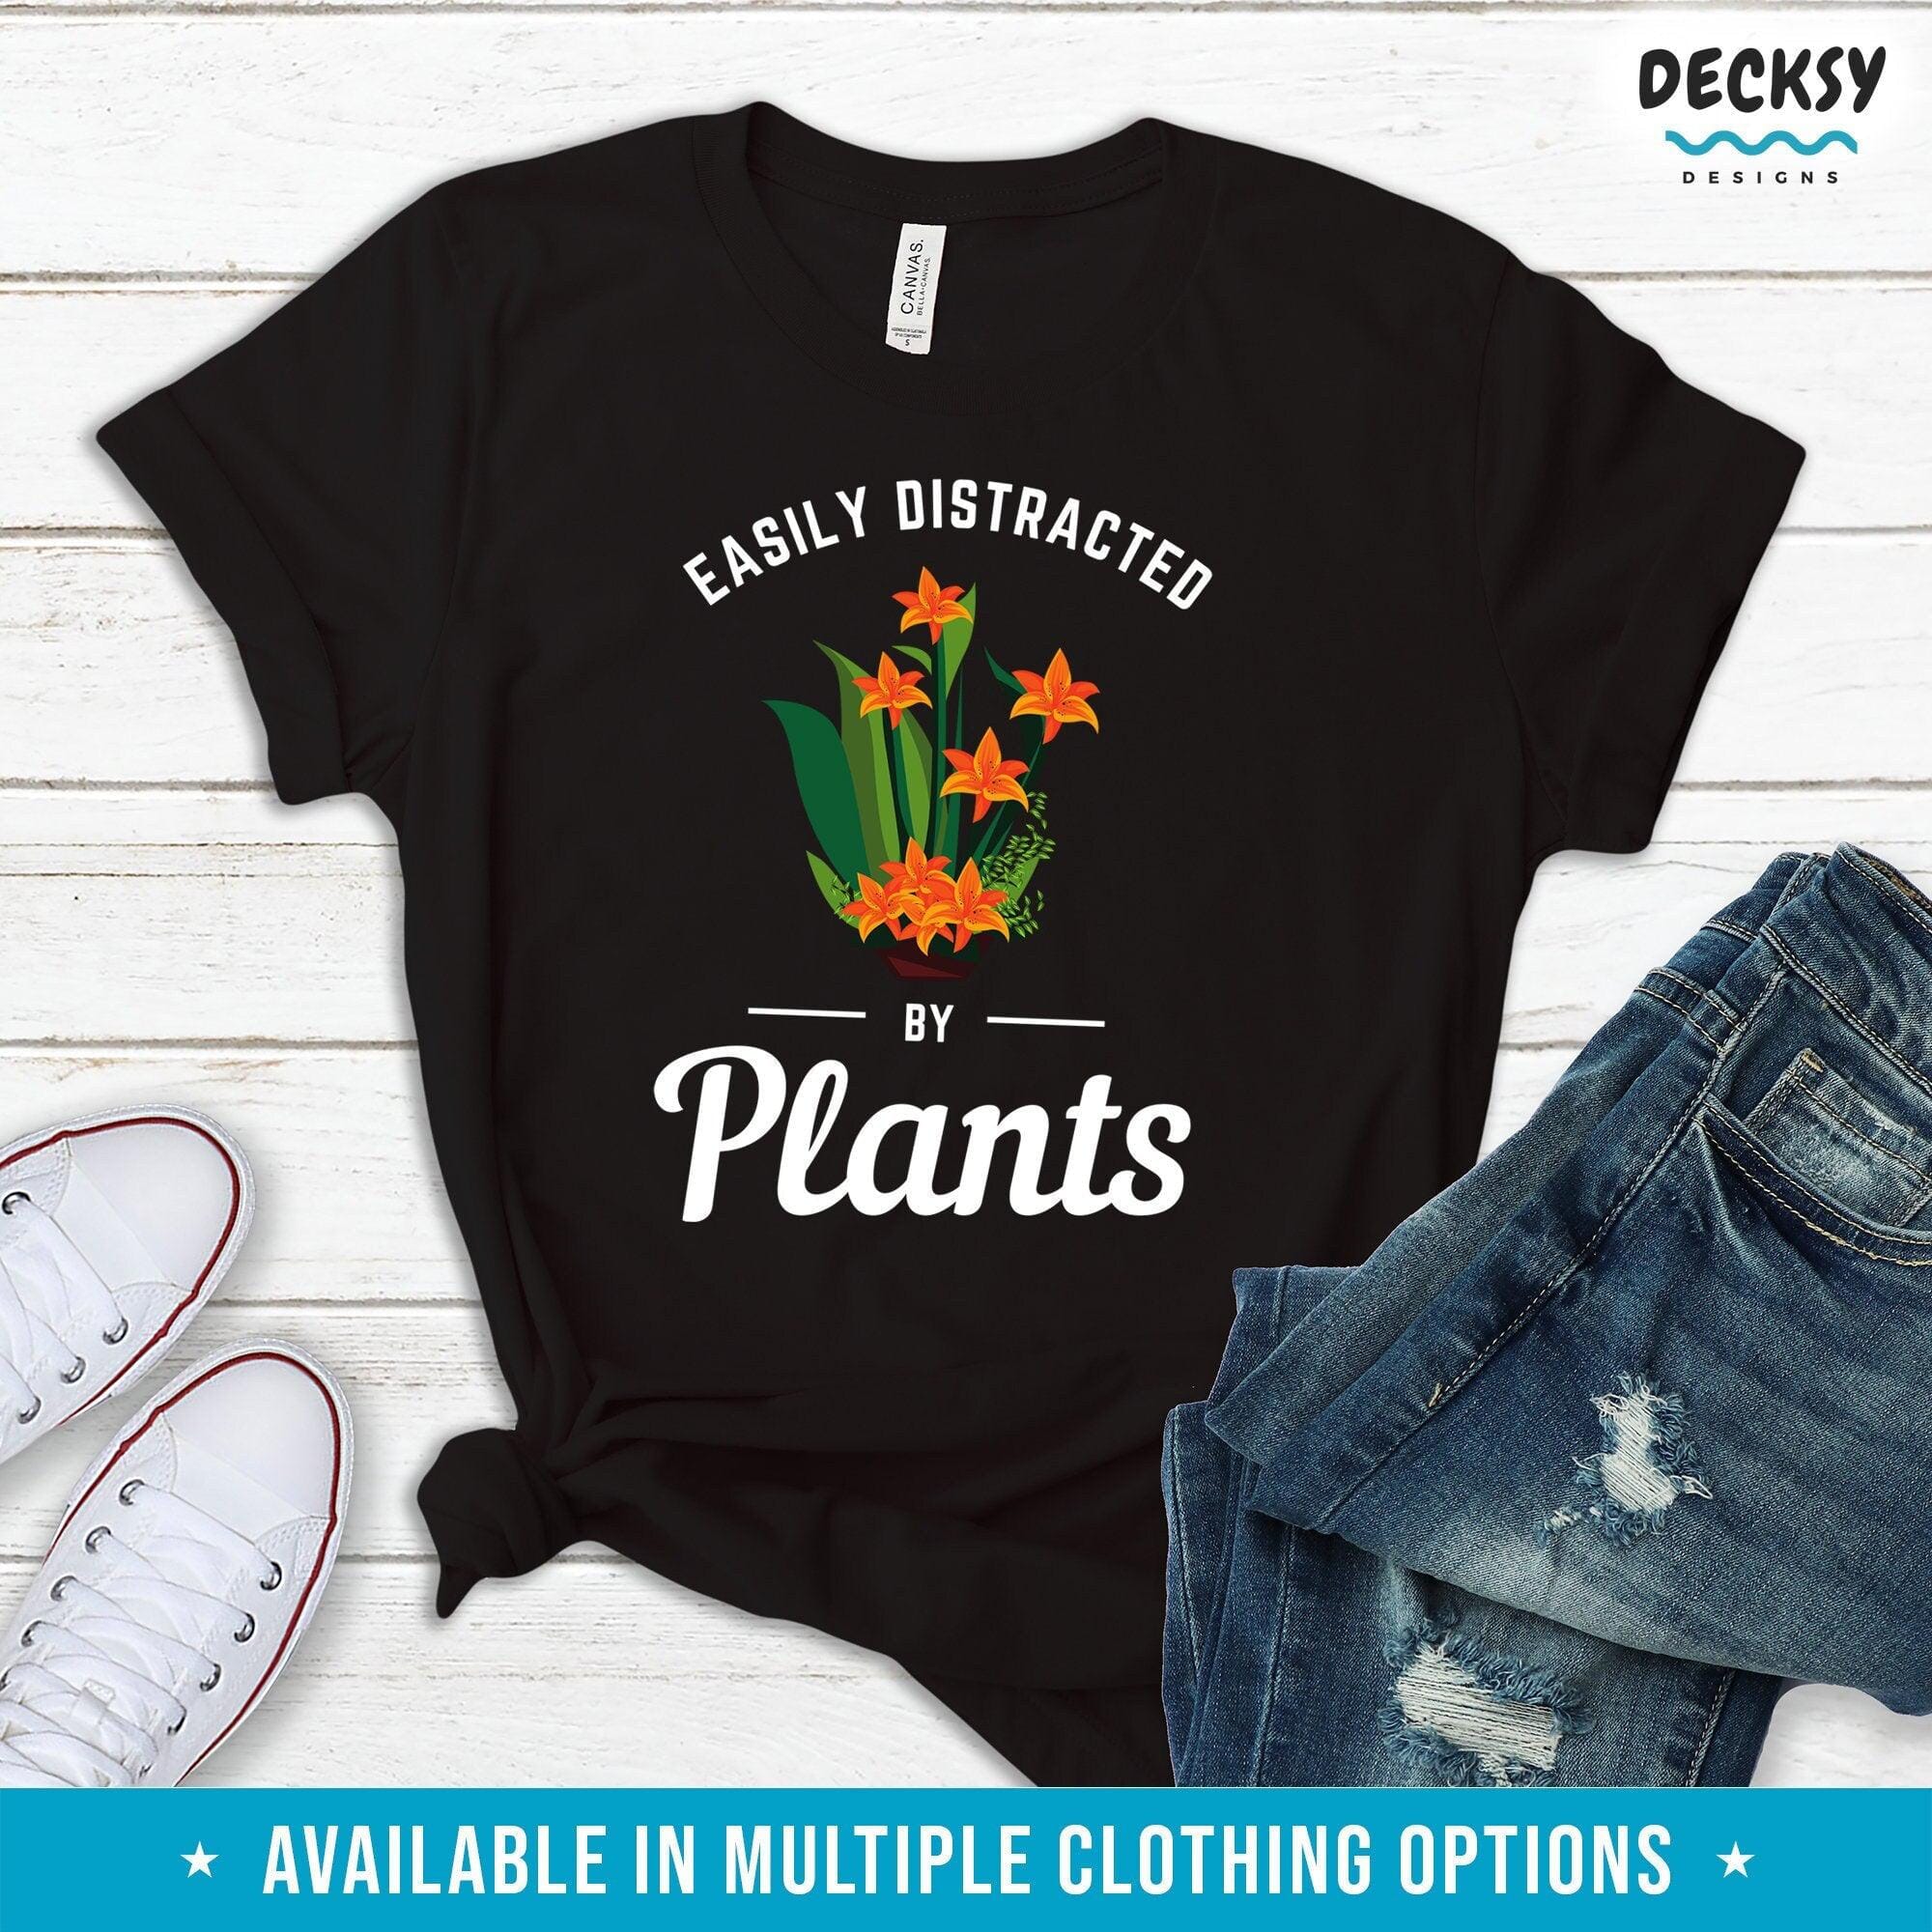 Easily Distracted By Plants Tshirt, Plant Lover Gift-Clothing:Gender-Neutral Adult Clothing:Tops & Tees:T-shirts:Graphic Tees-DecksyDesigns